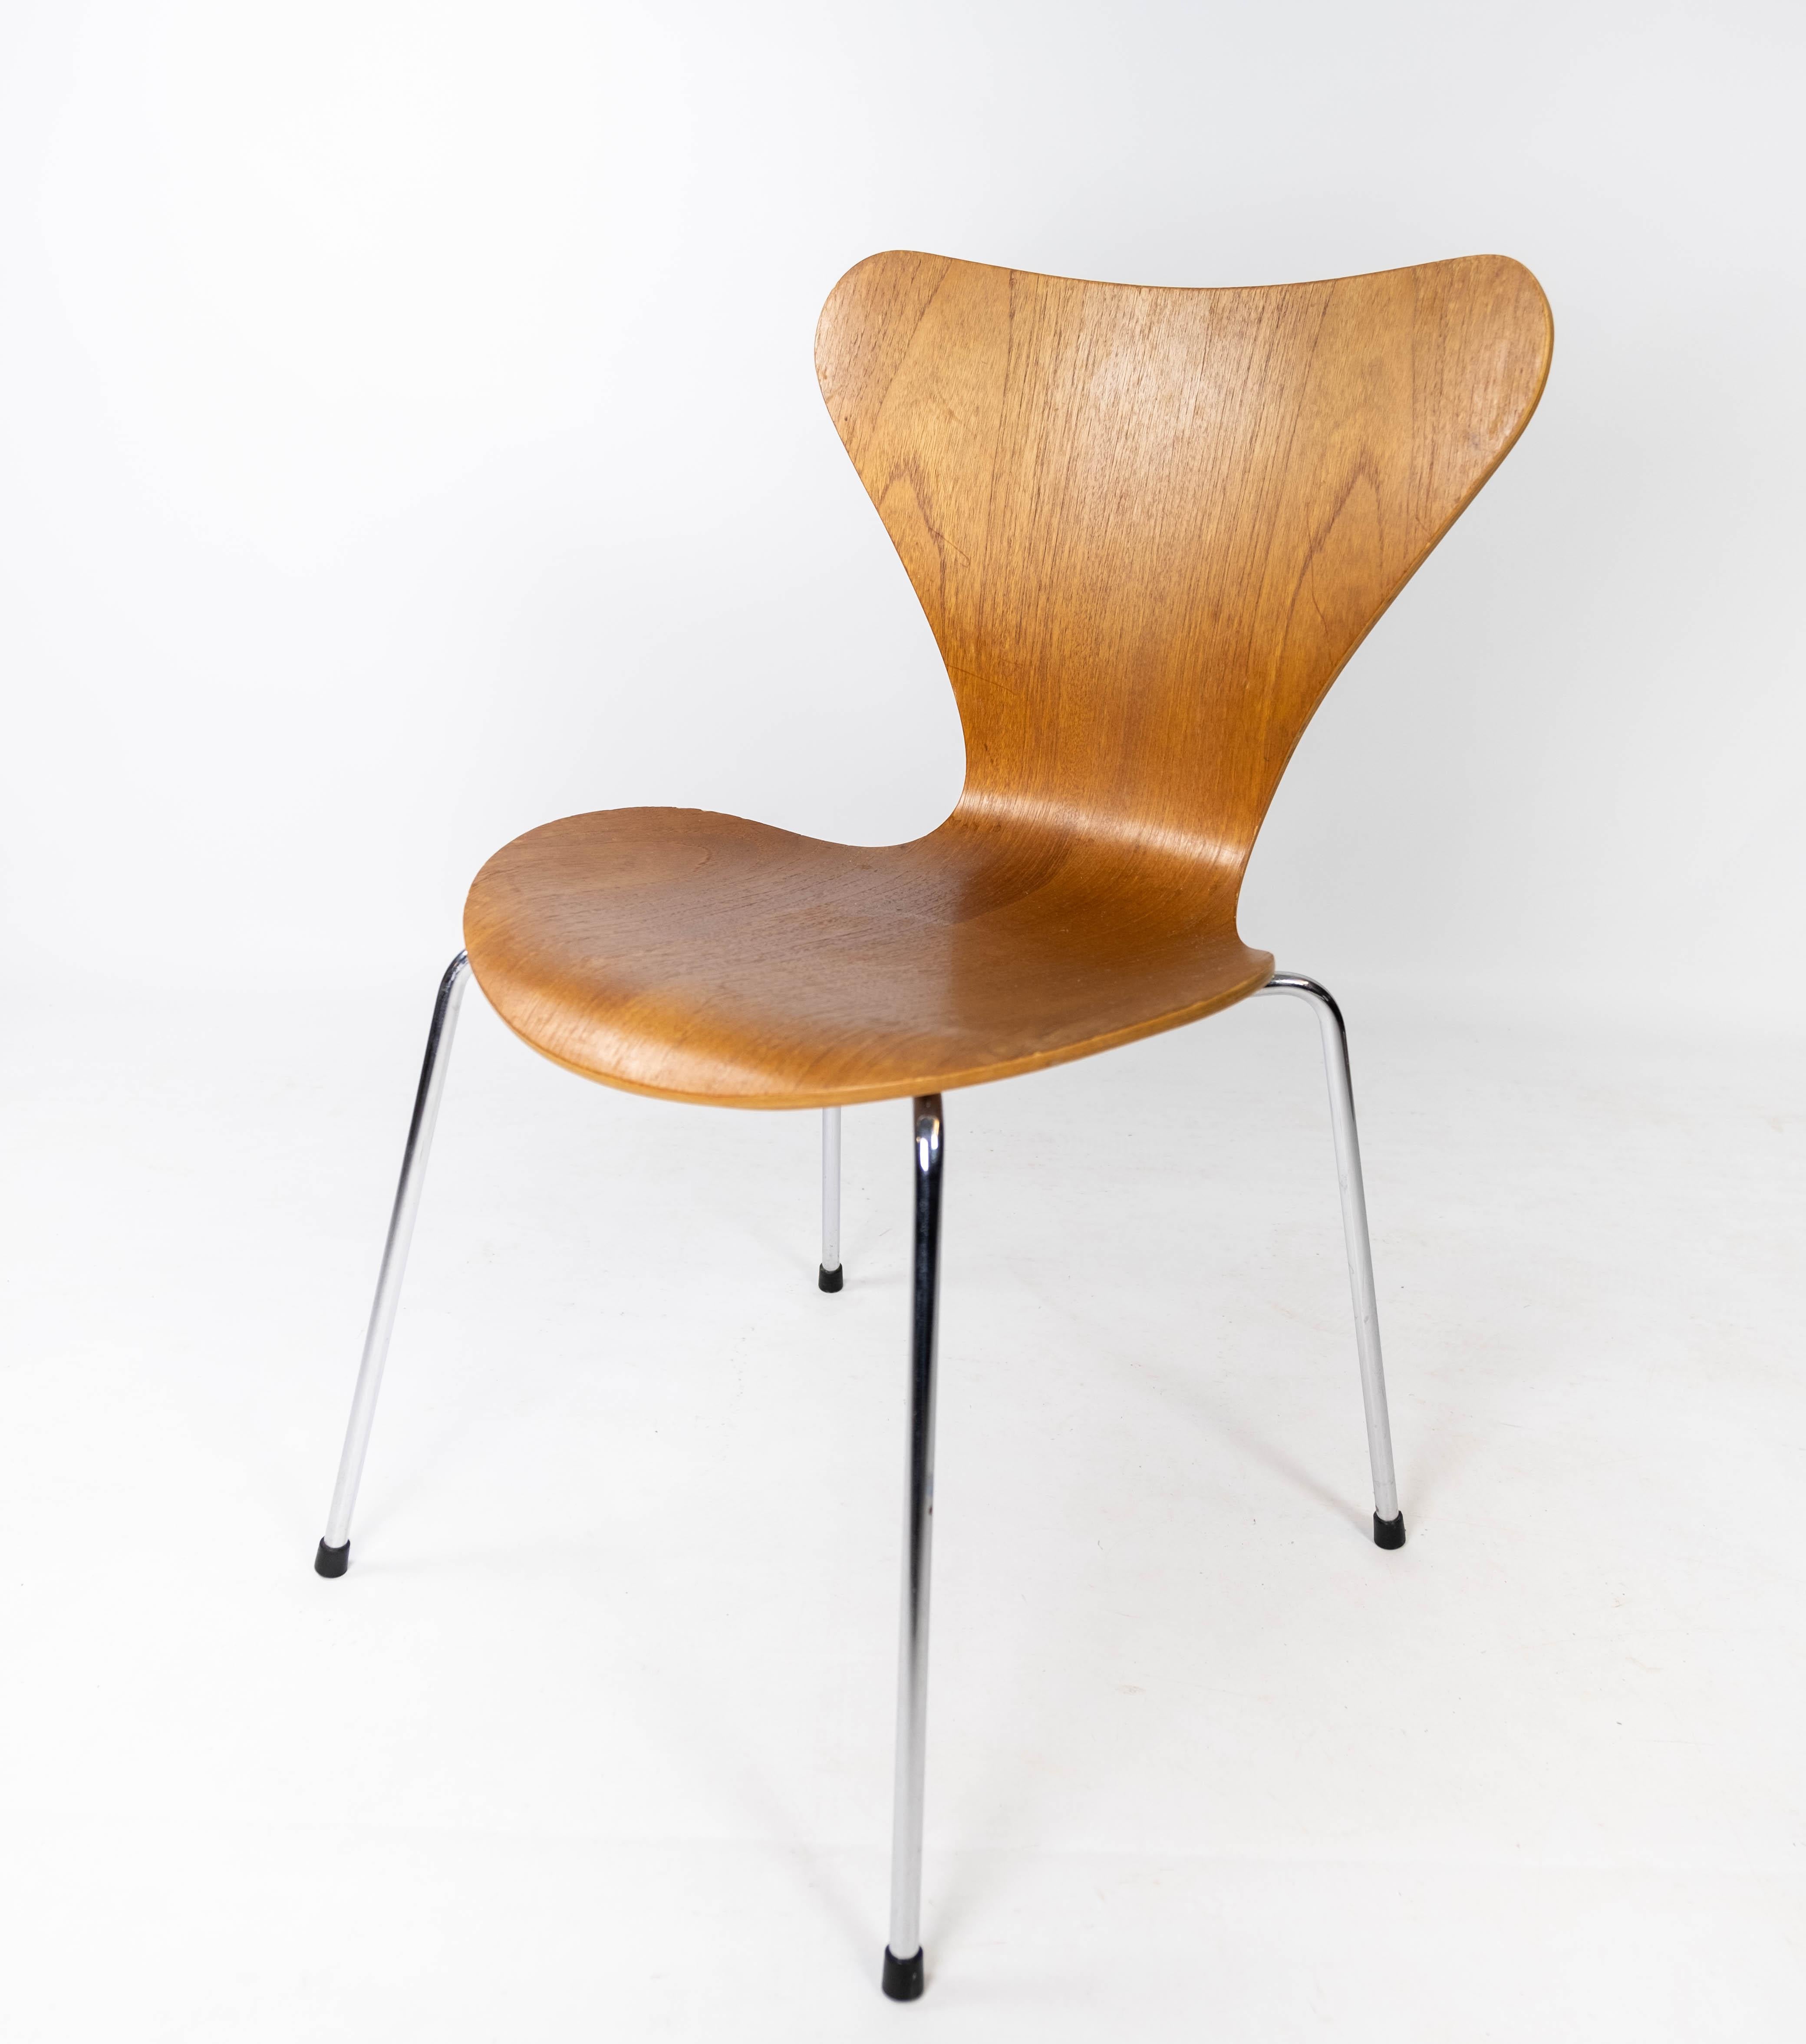 A set of 12 series seven chairs, model 3107, of teak designed by Arne Jacobsen and manufactured by Fritz Hansen in 1996. The chairs are in great vintage condition.